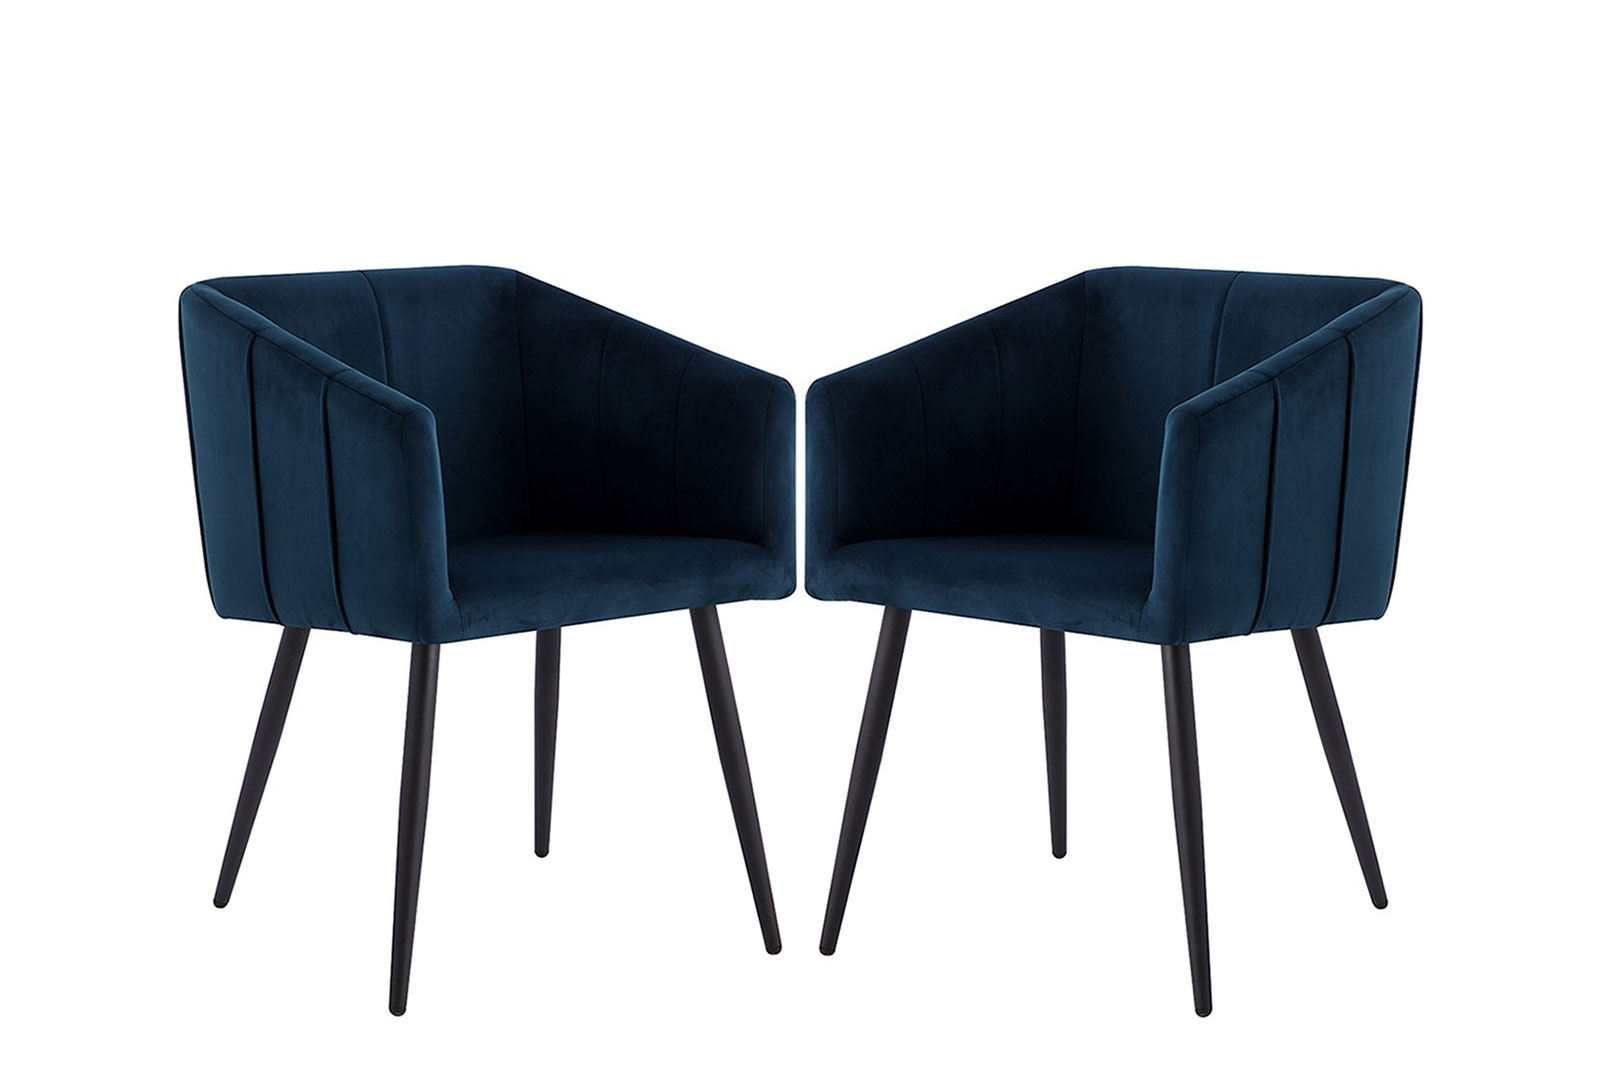 A set of two modern Archie 226 chairs